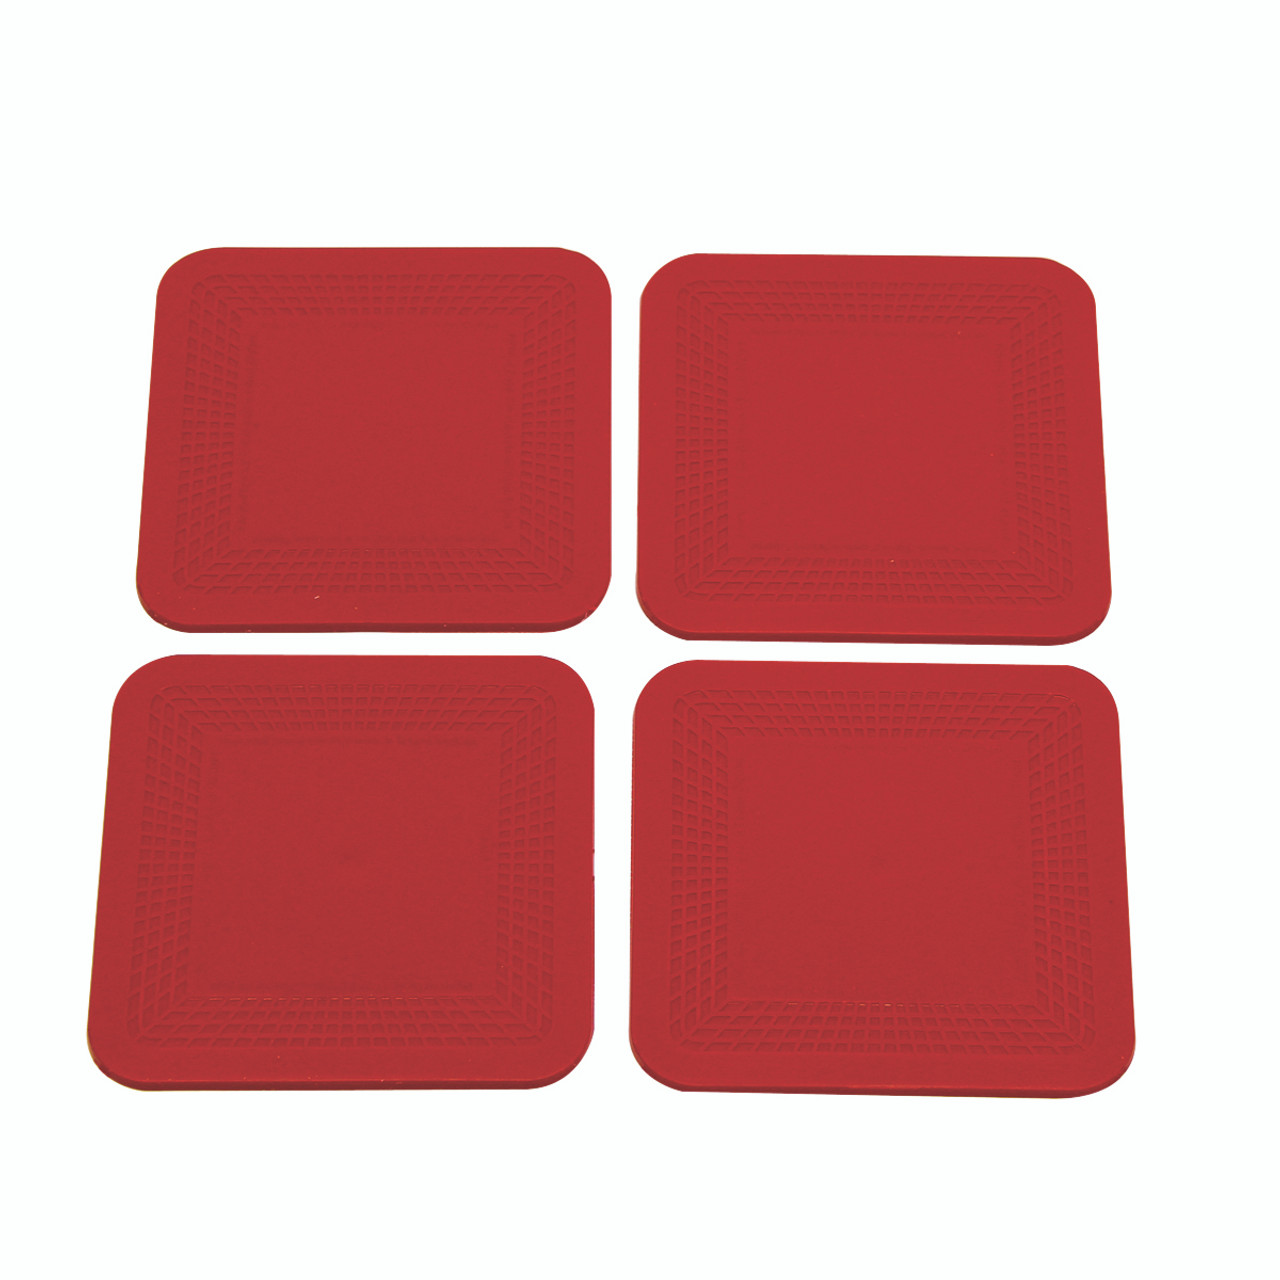 Dycem¨ non-slip square coasters, set of 4, red